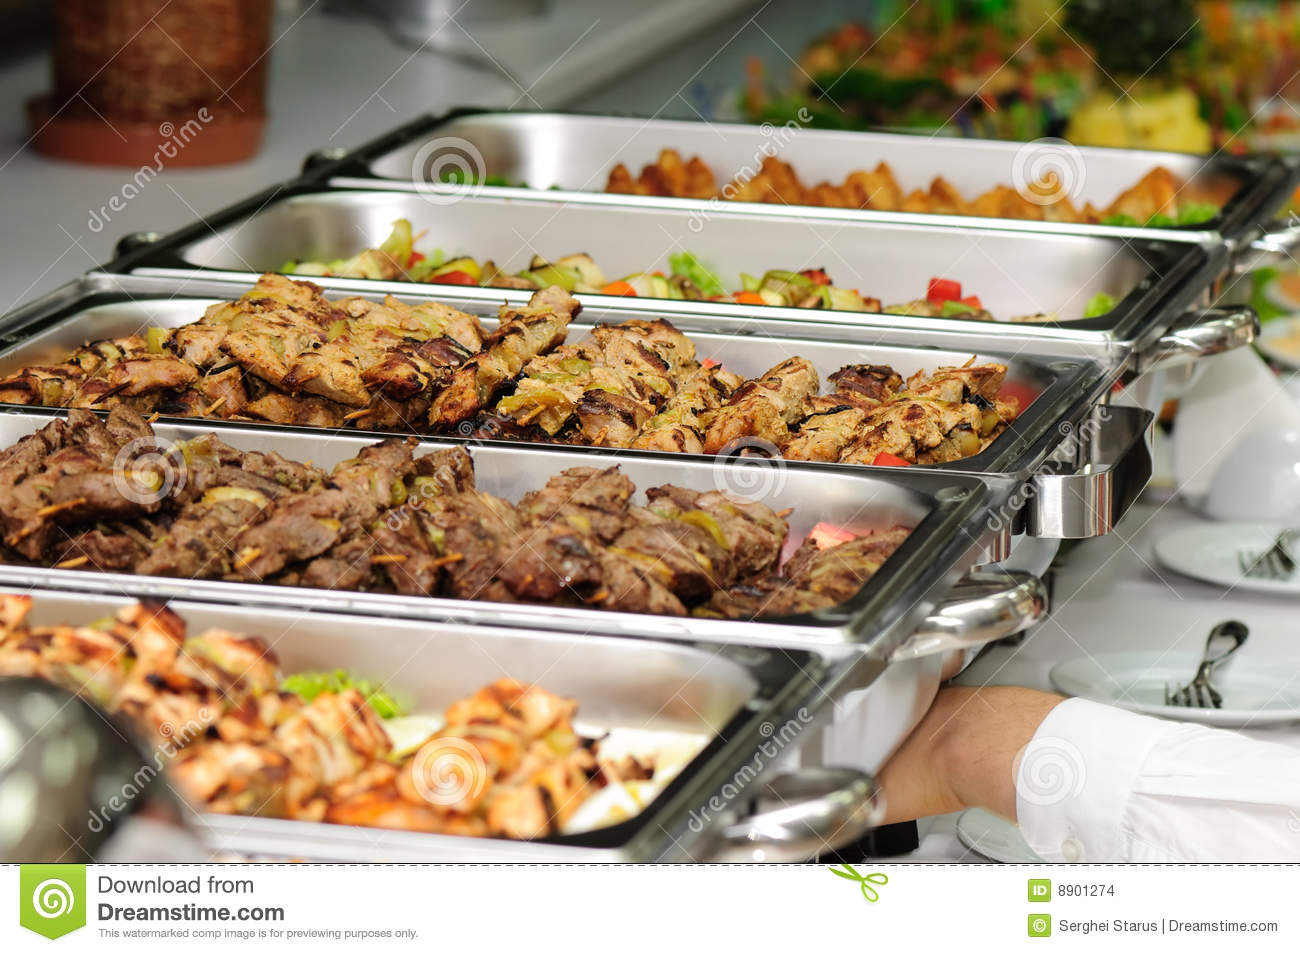 Banquet Table Stock Images   Image  8901274